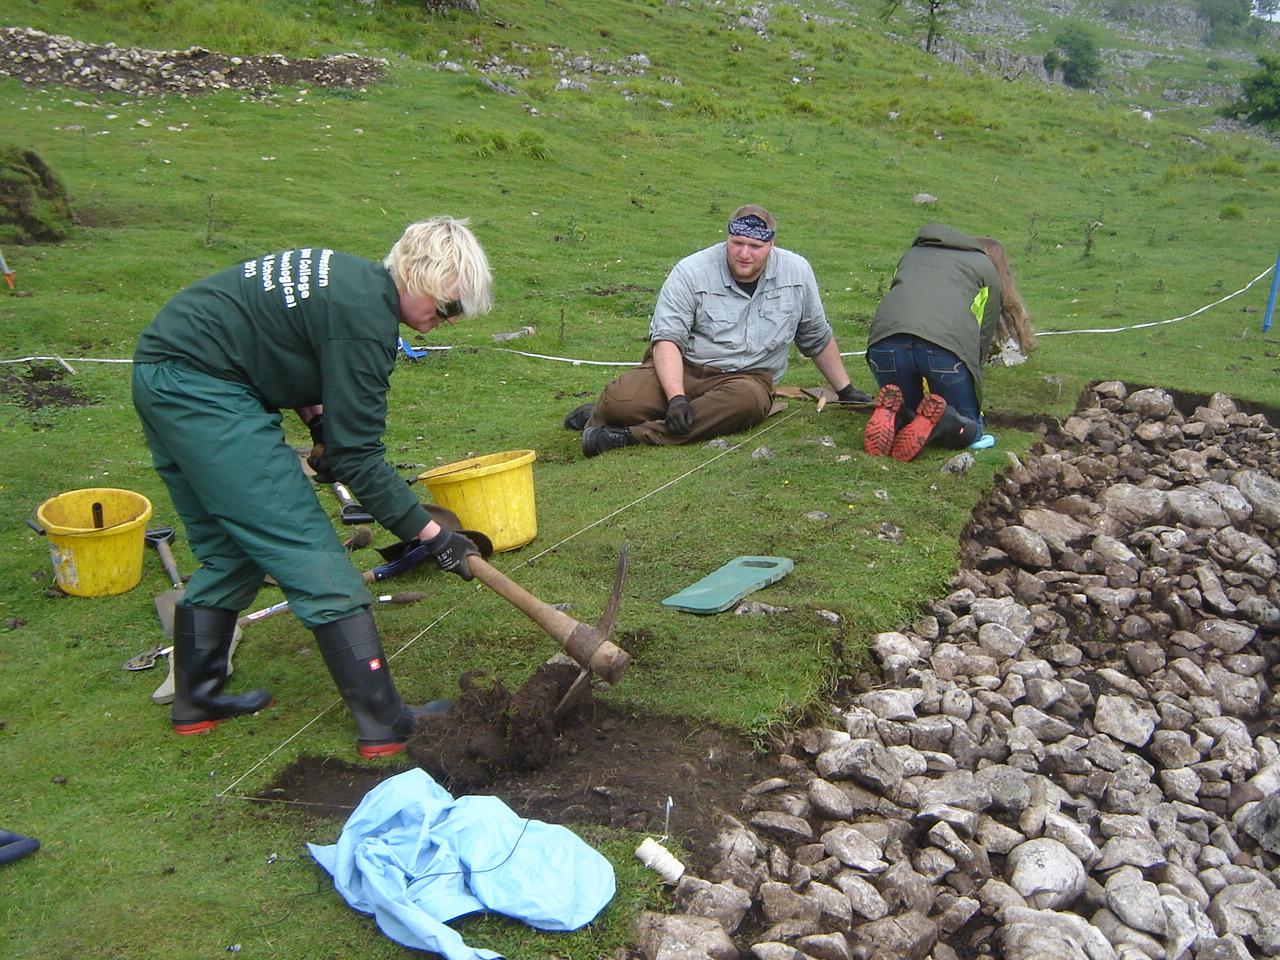 Roman Iron Age site in Upper Wharfdale, Yorkshire